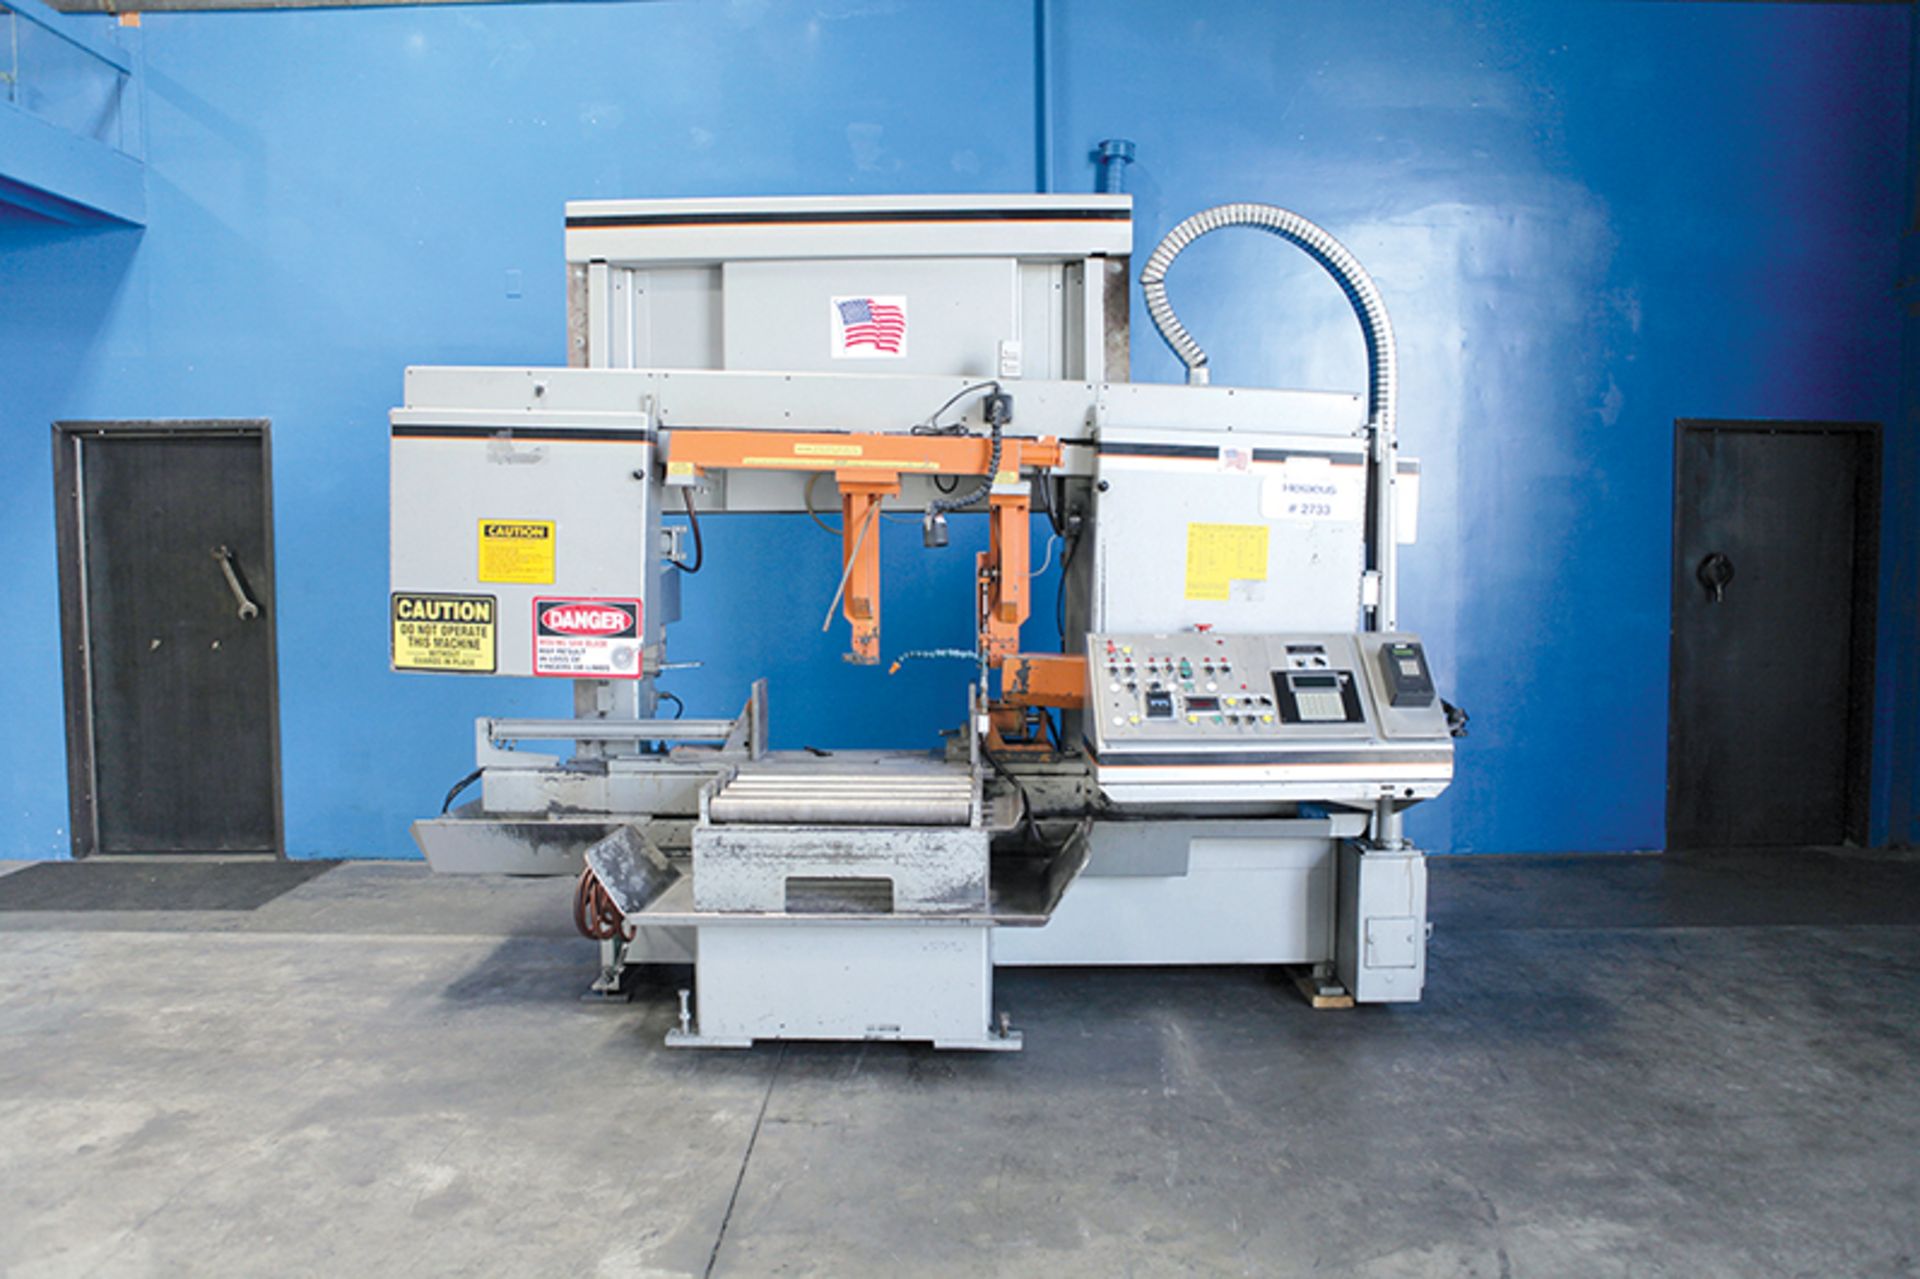 Upcoming Auctions - (2) Metalworking, Fabrication, Machining & Plant Support Equipment Auctions - Bild 12 aus 16